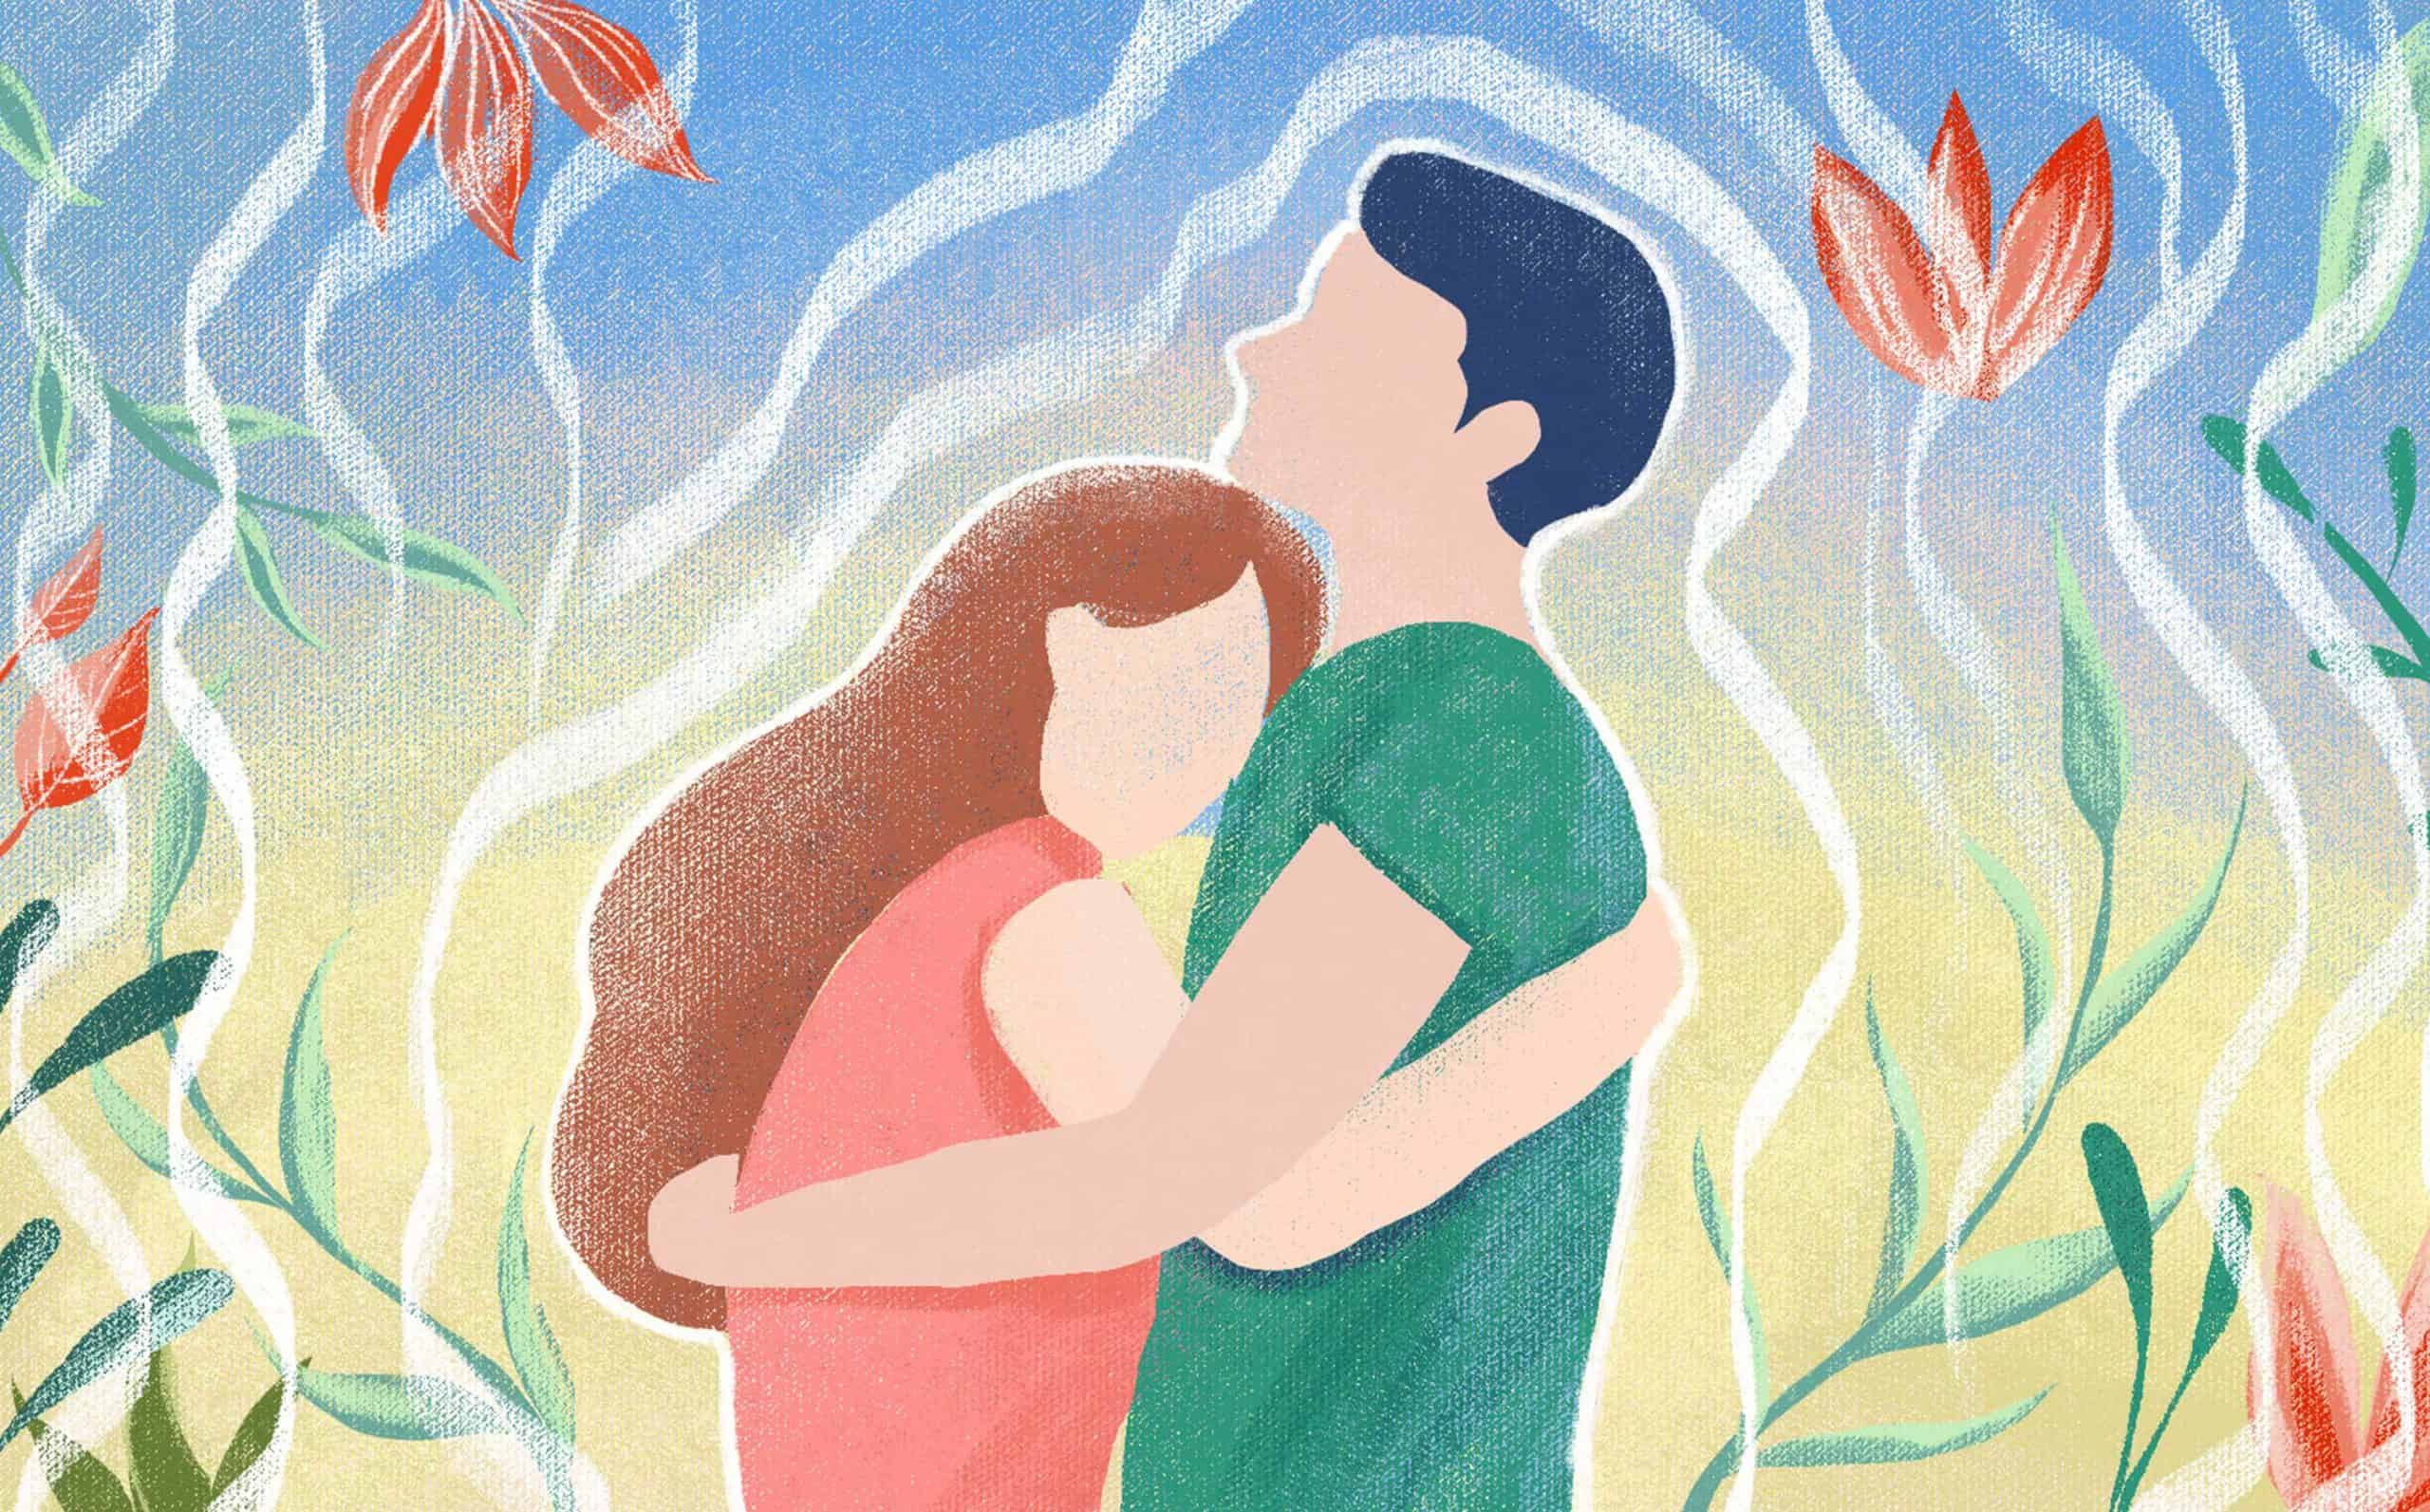 An illustration of a husband and wife embracing, surrounded by flowers and leaves.